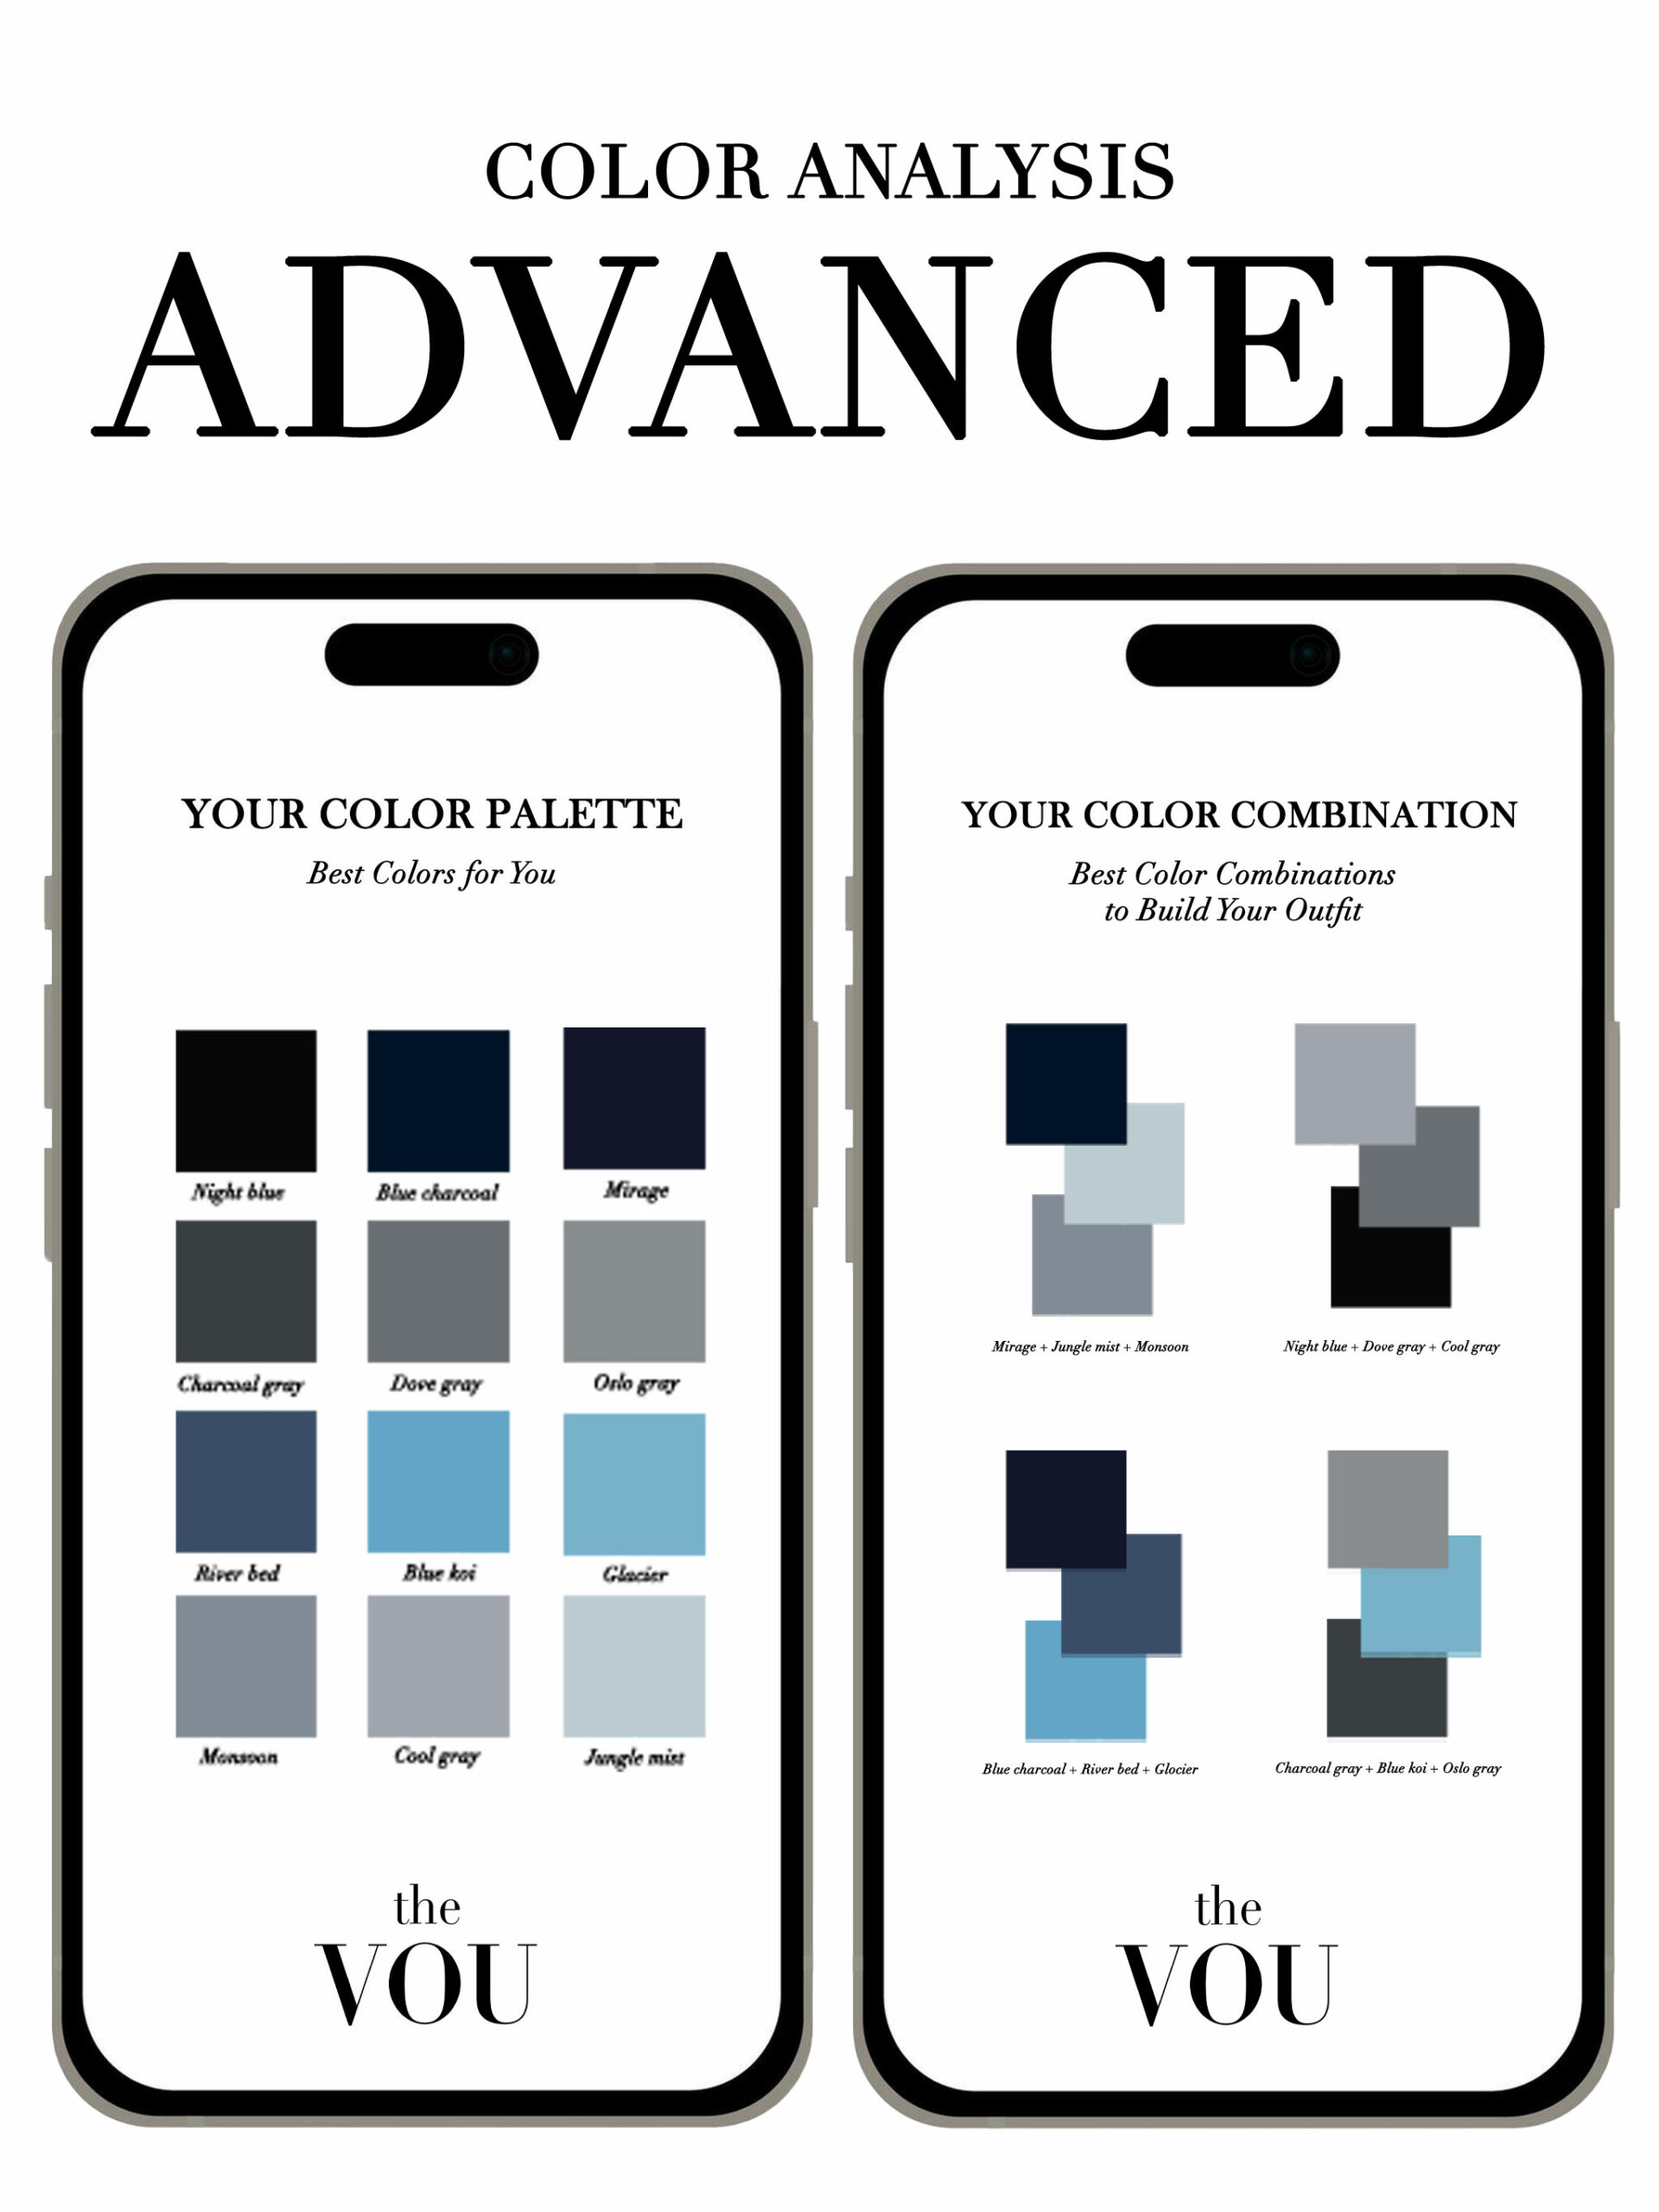 Advanced Color Analysis for Men